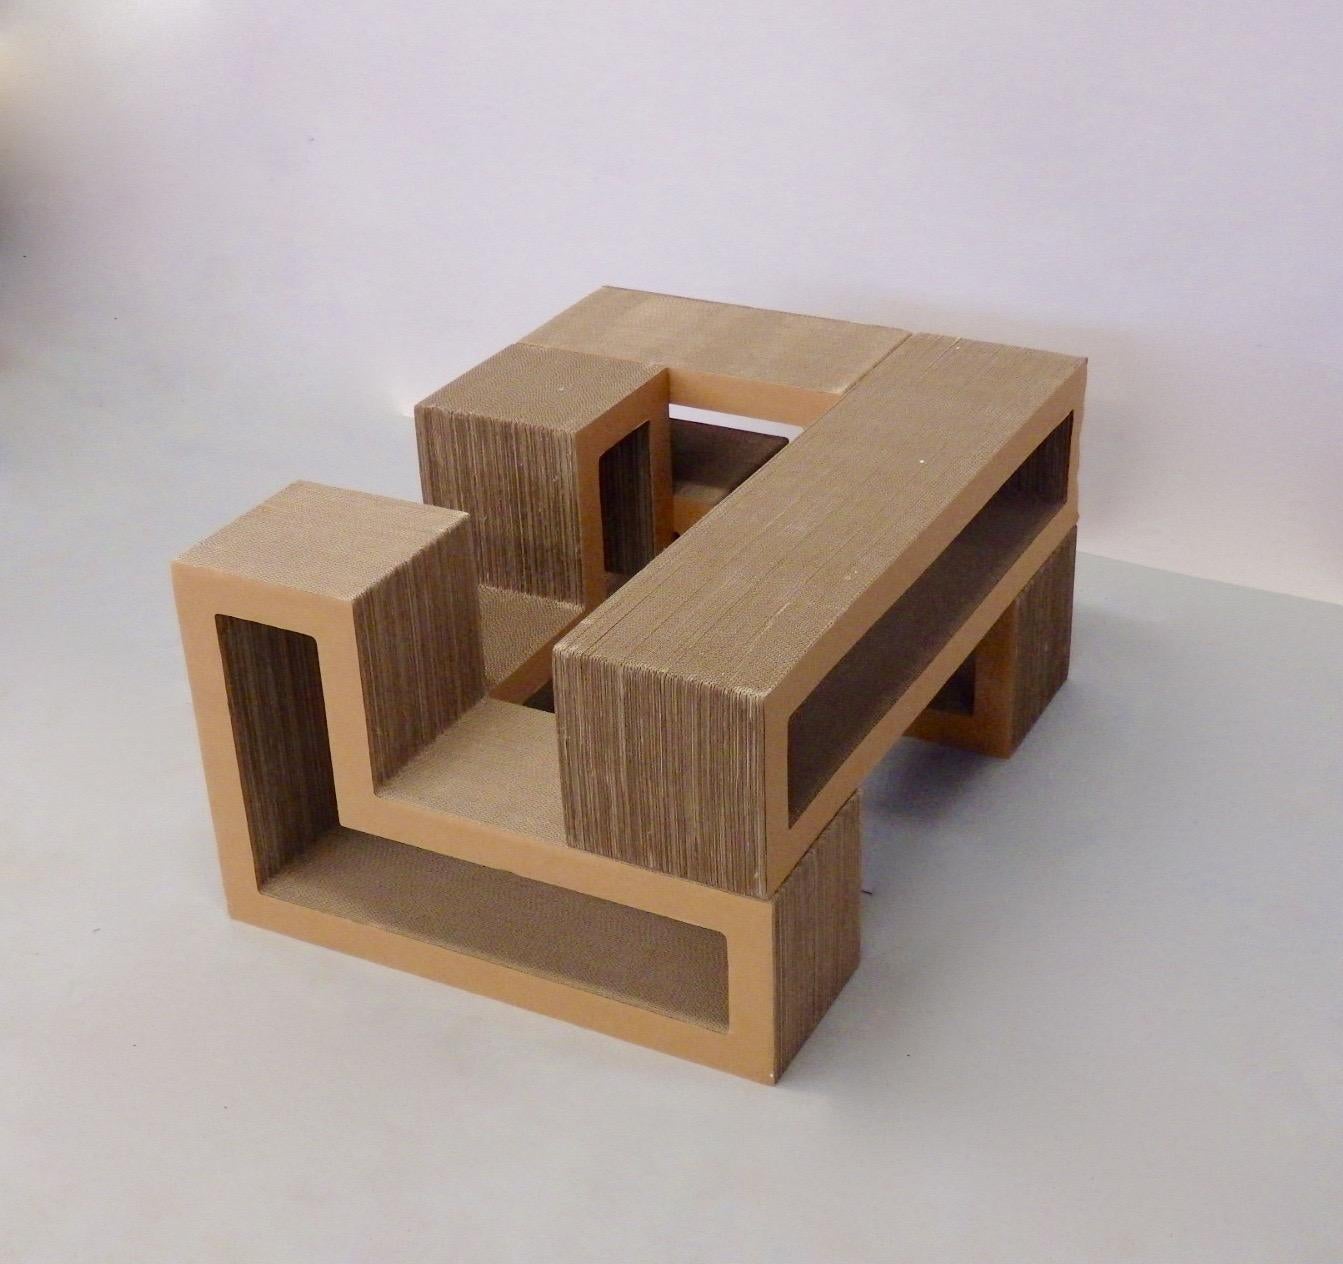 Cardboard Puzzle Piece Modular Shelf or Coffee Table Attributed to Frank Gehry 1